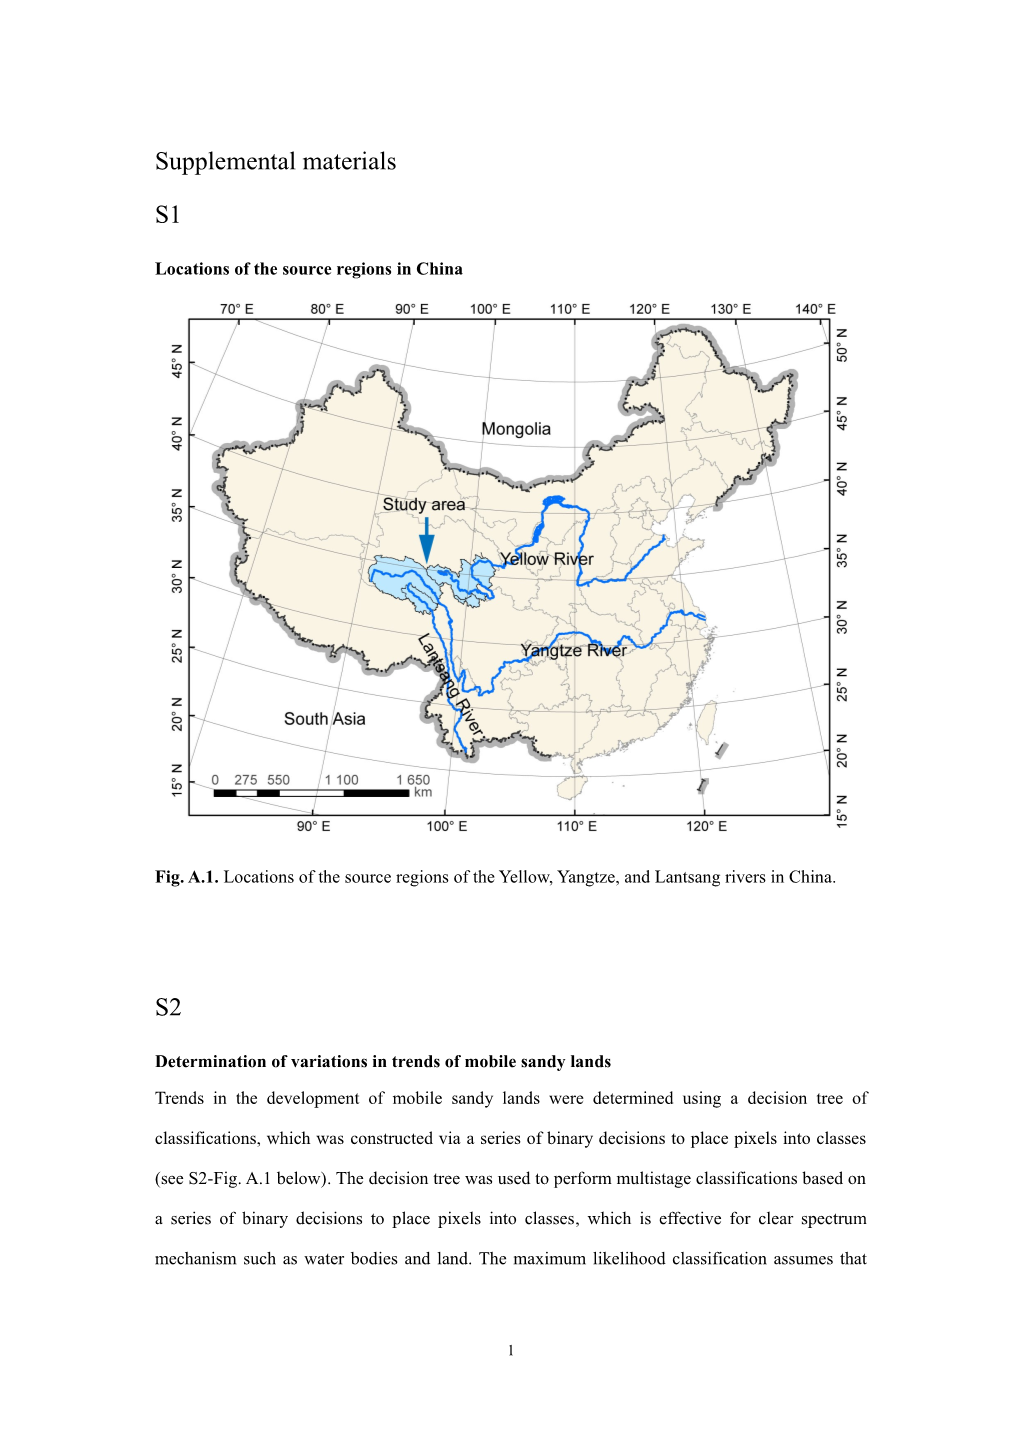 Locations of the Source Regions in China